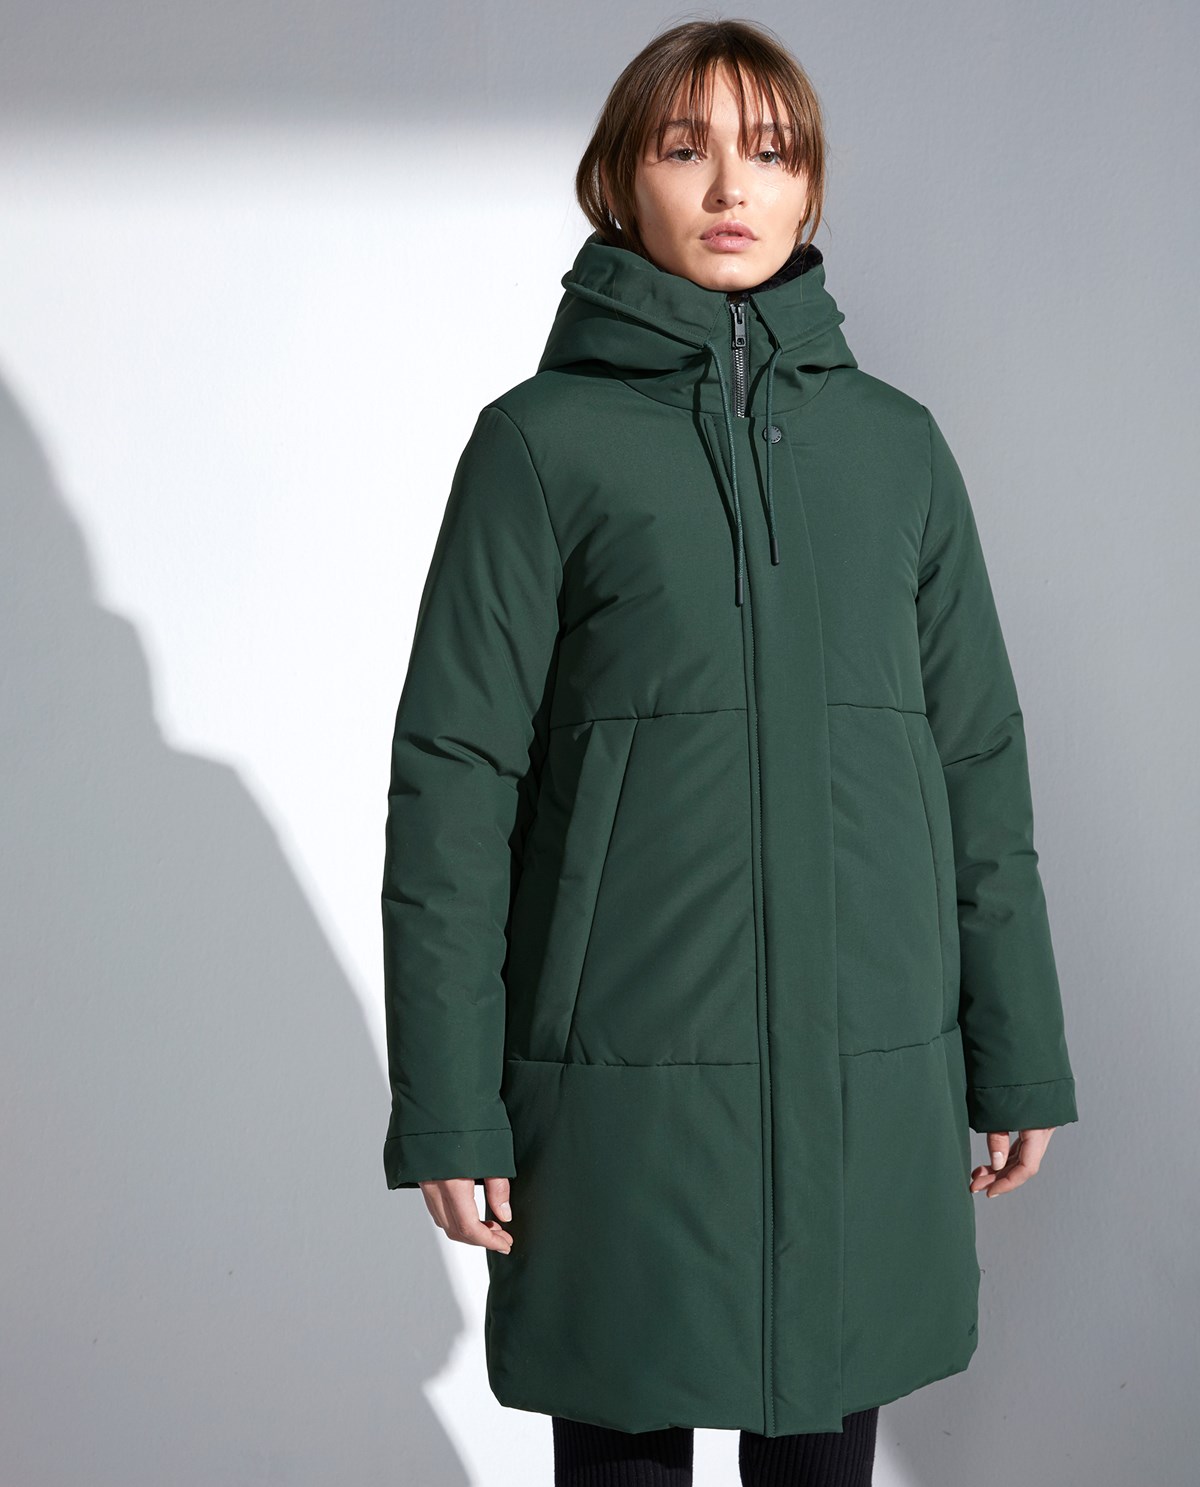 Find out how easy it is to find an Elvine winter jacket to buy now post thumbnail image